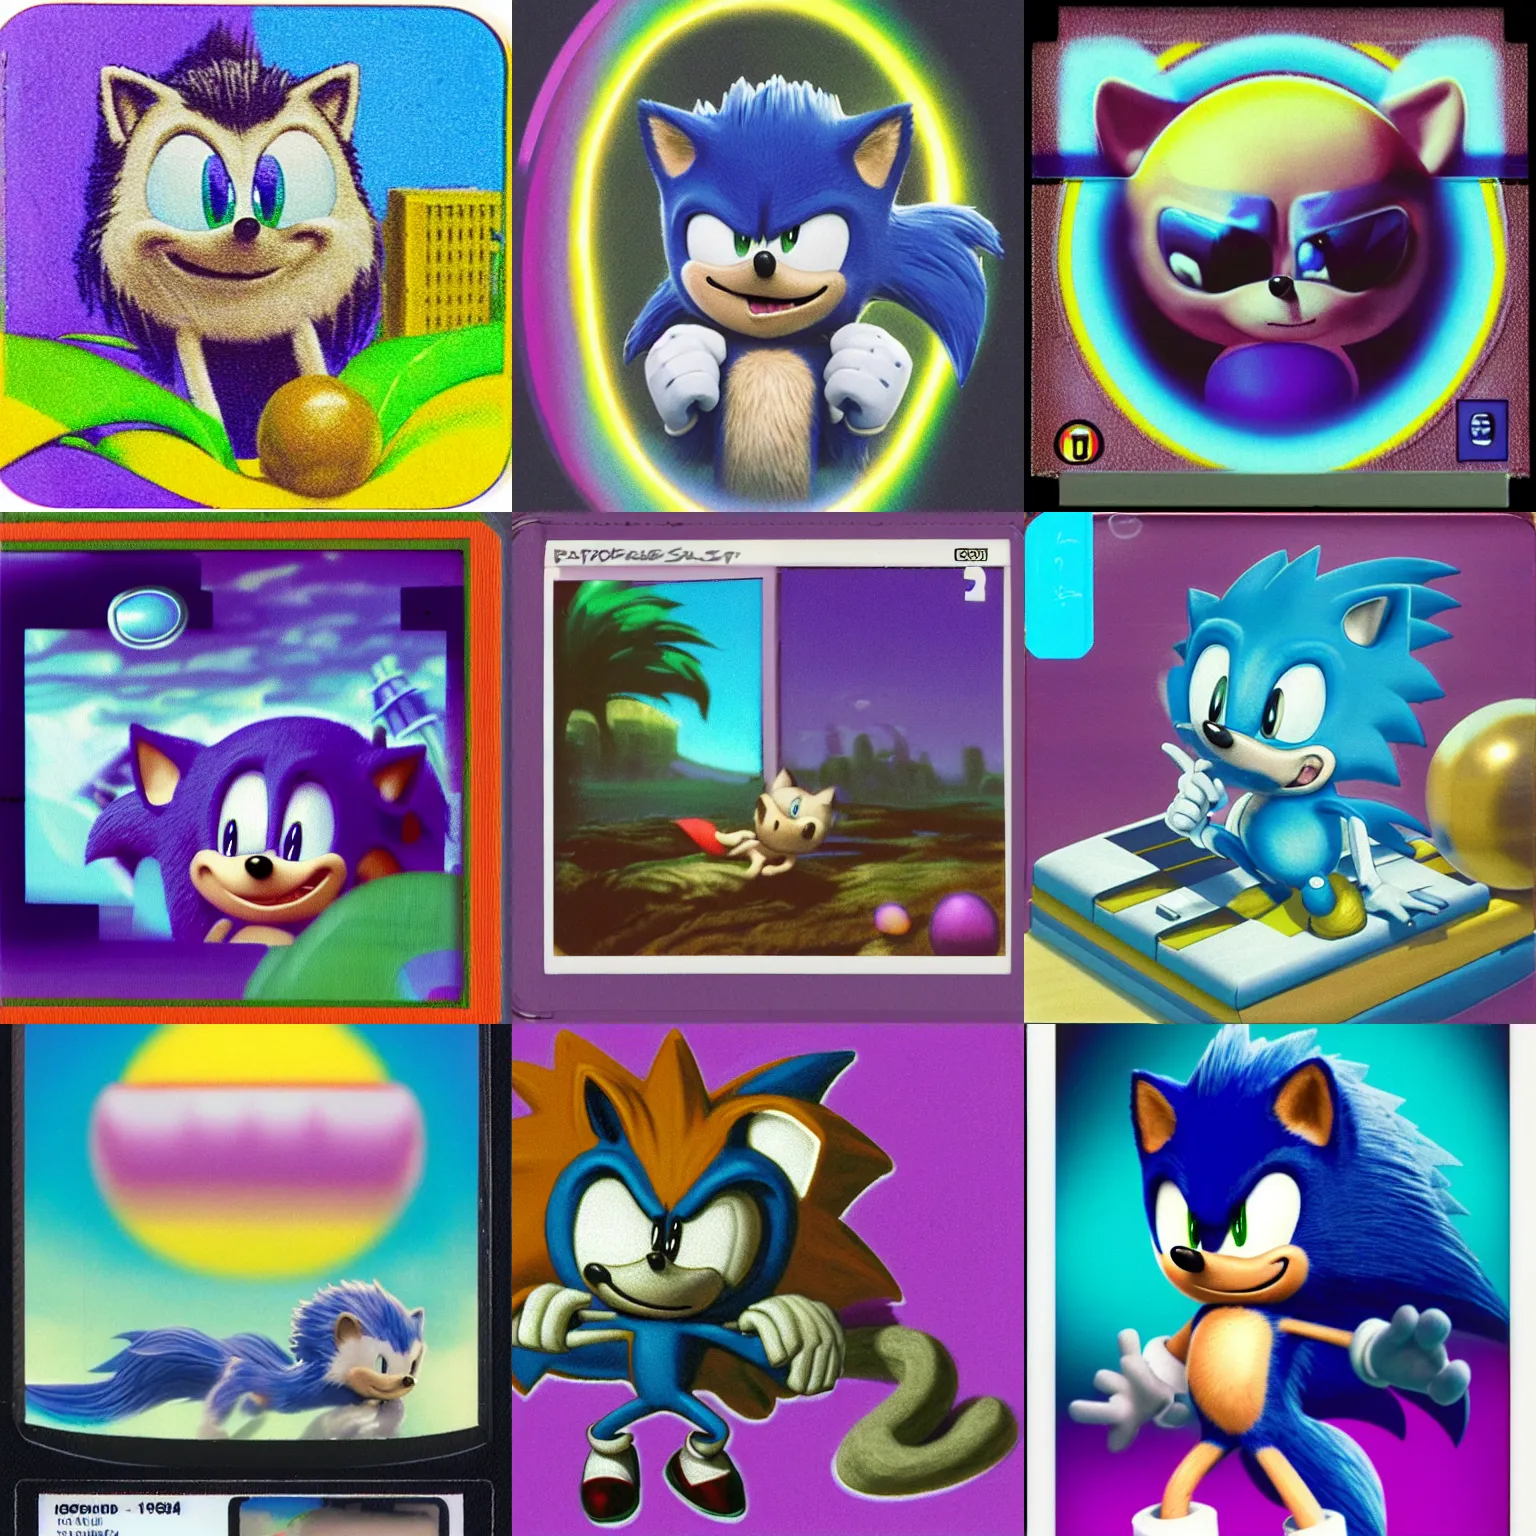 Prompt: polaroid instax portrait of sonic hedgehog and a matte painting landscape of a surreal, sharp, detailed professional, soft pastels, high quality airbrush art album cover of a liquid dissolving airbrush art lsd dmt sonic the hedgehog swimming through cyberspace, purple checkerboard background, 1 9 9 0 s 1 9 9 2 sega genesis rareware video game album cover